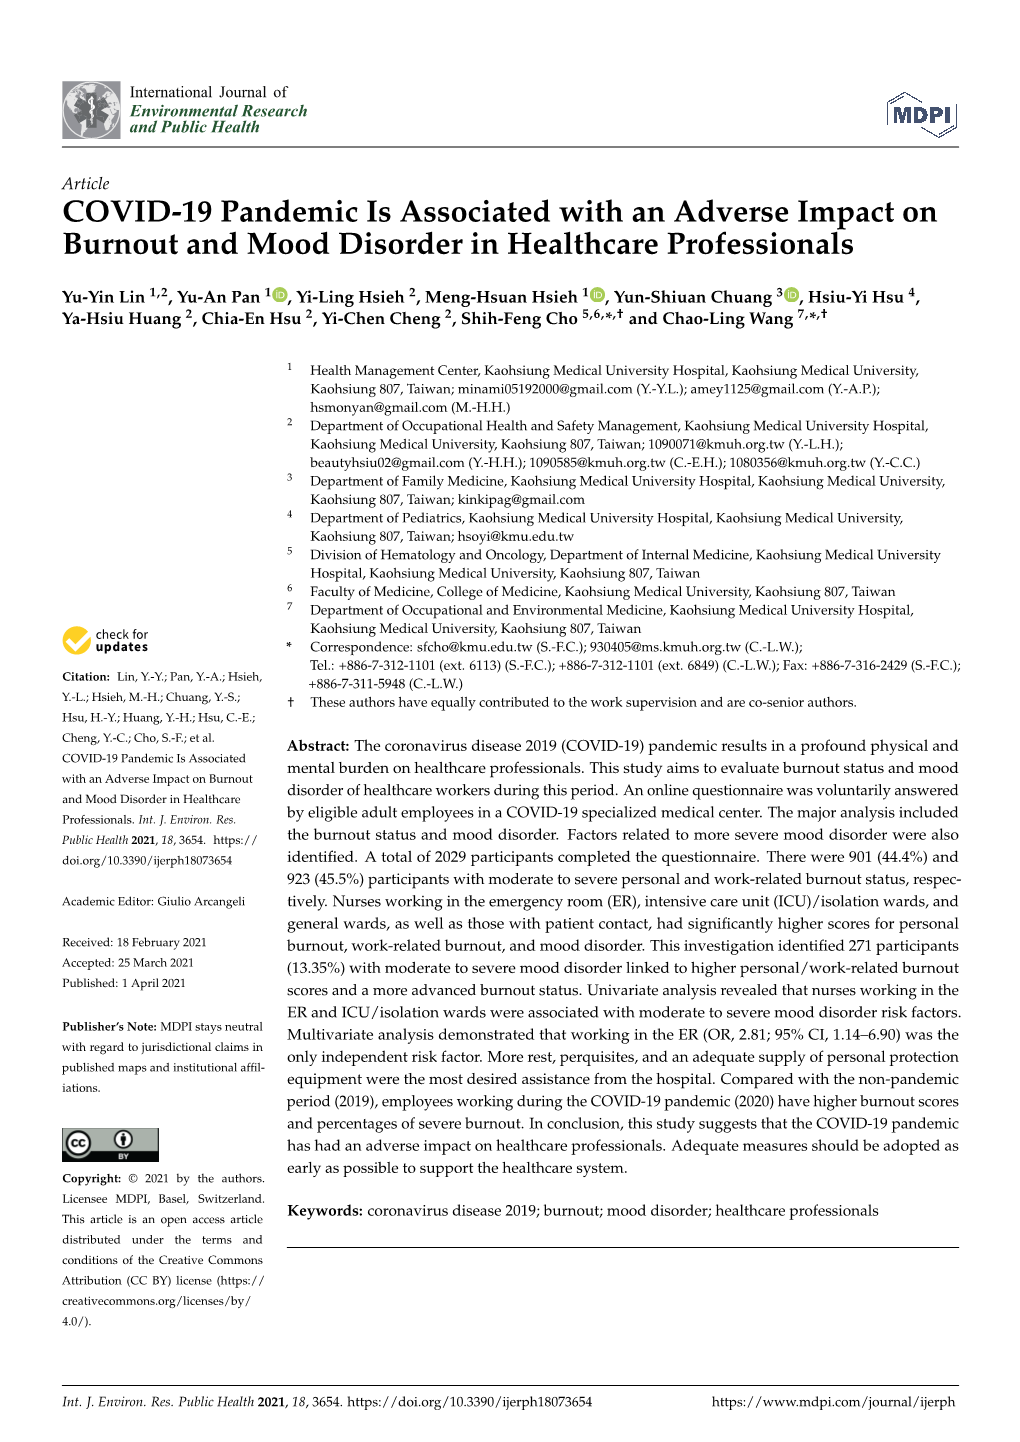 COVID-19 Pandemic Is Associated with an Adverse Impact on Burnout and Mood Disorder in Healthcare Professionals